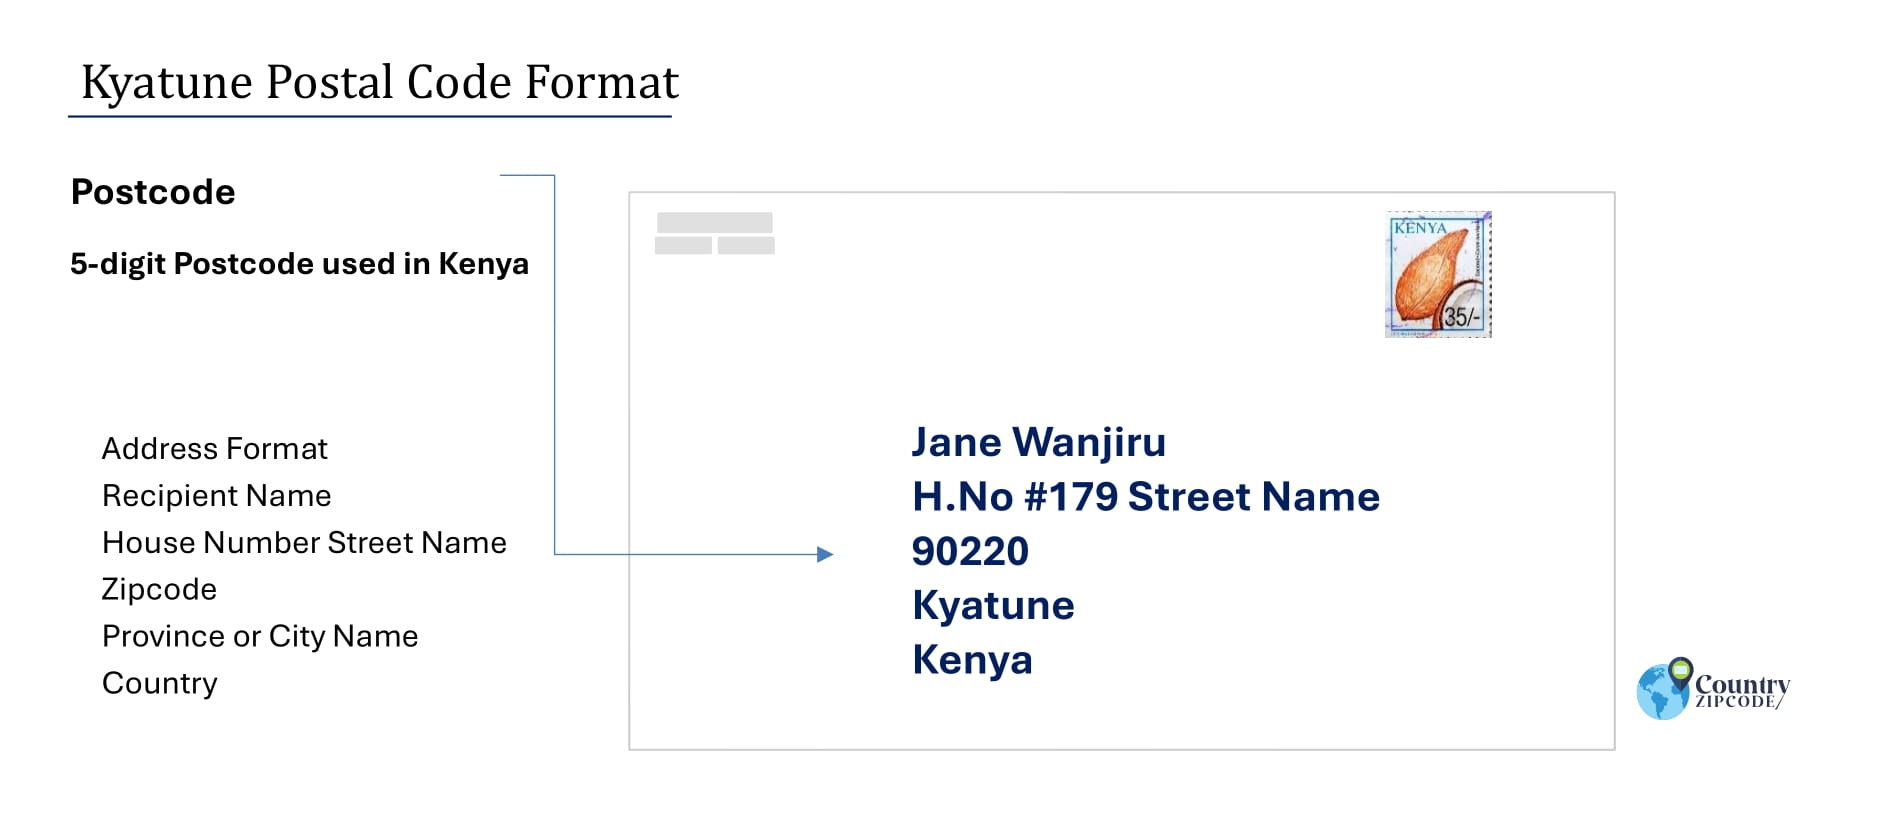 Example of Kyatune Address and postal code format